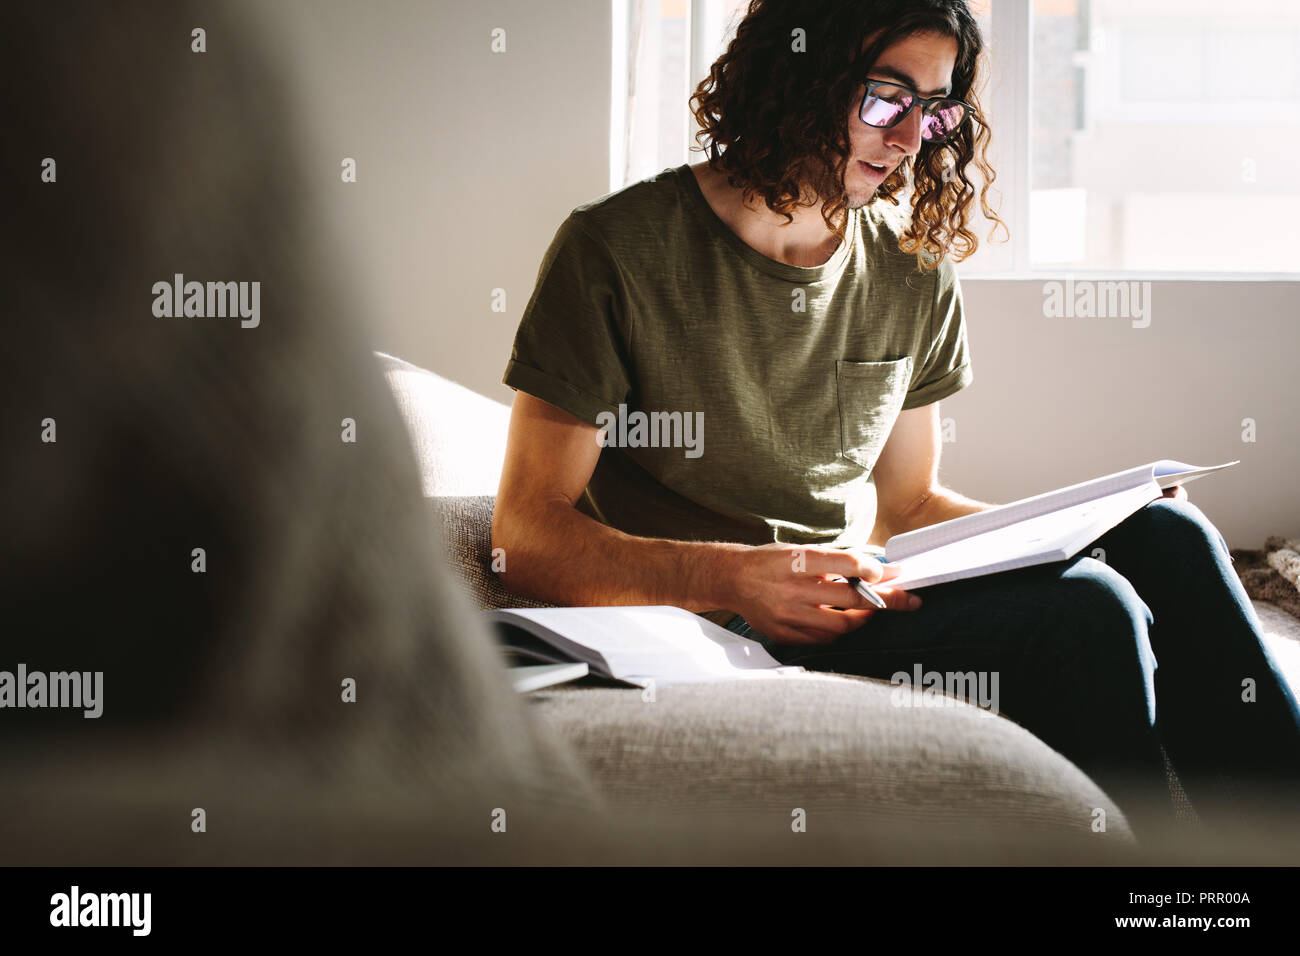 Male student studying sitting on a couch at home. Young man preparing for exam reading a book. Stock Photo